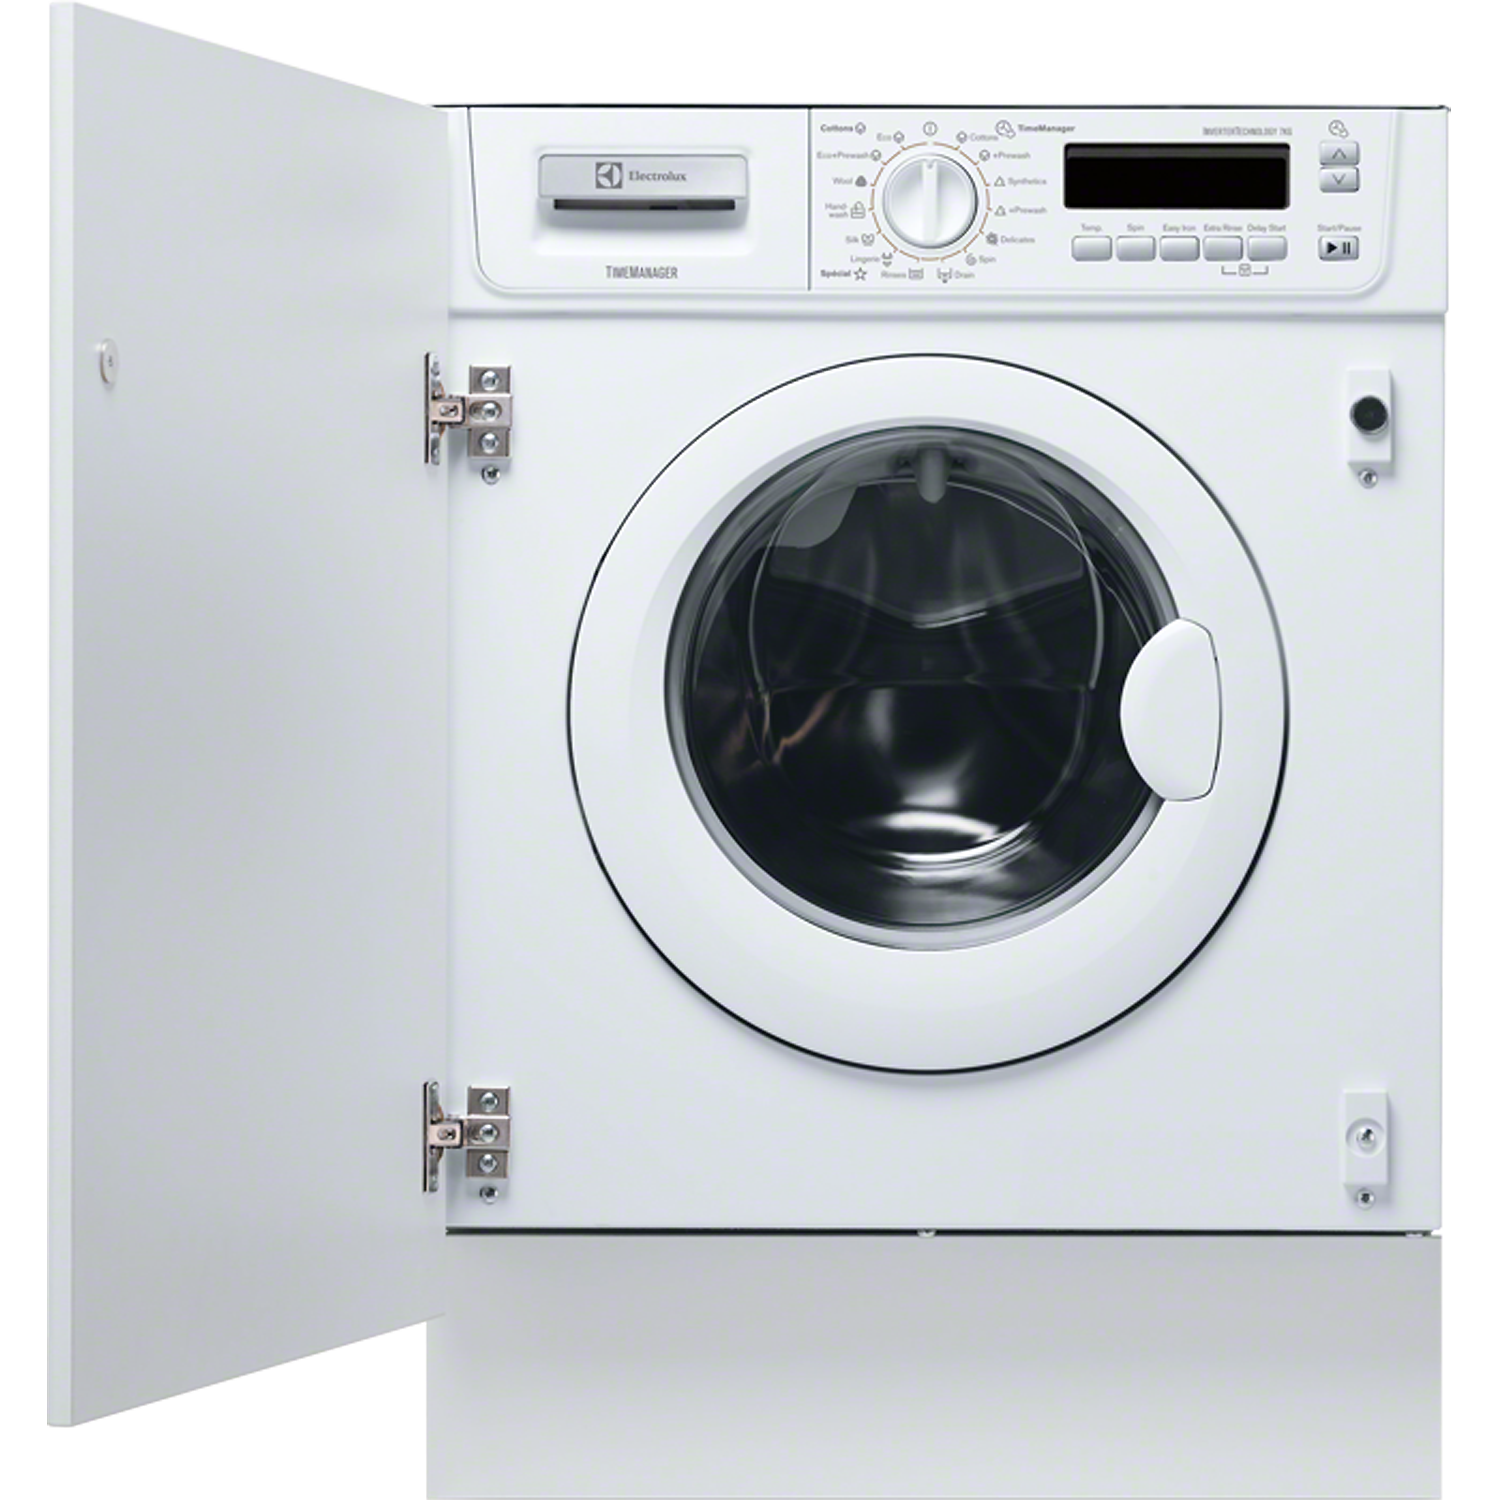 Electrolux EWG147540W Washing Machine - review, compare prices, buy online